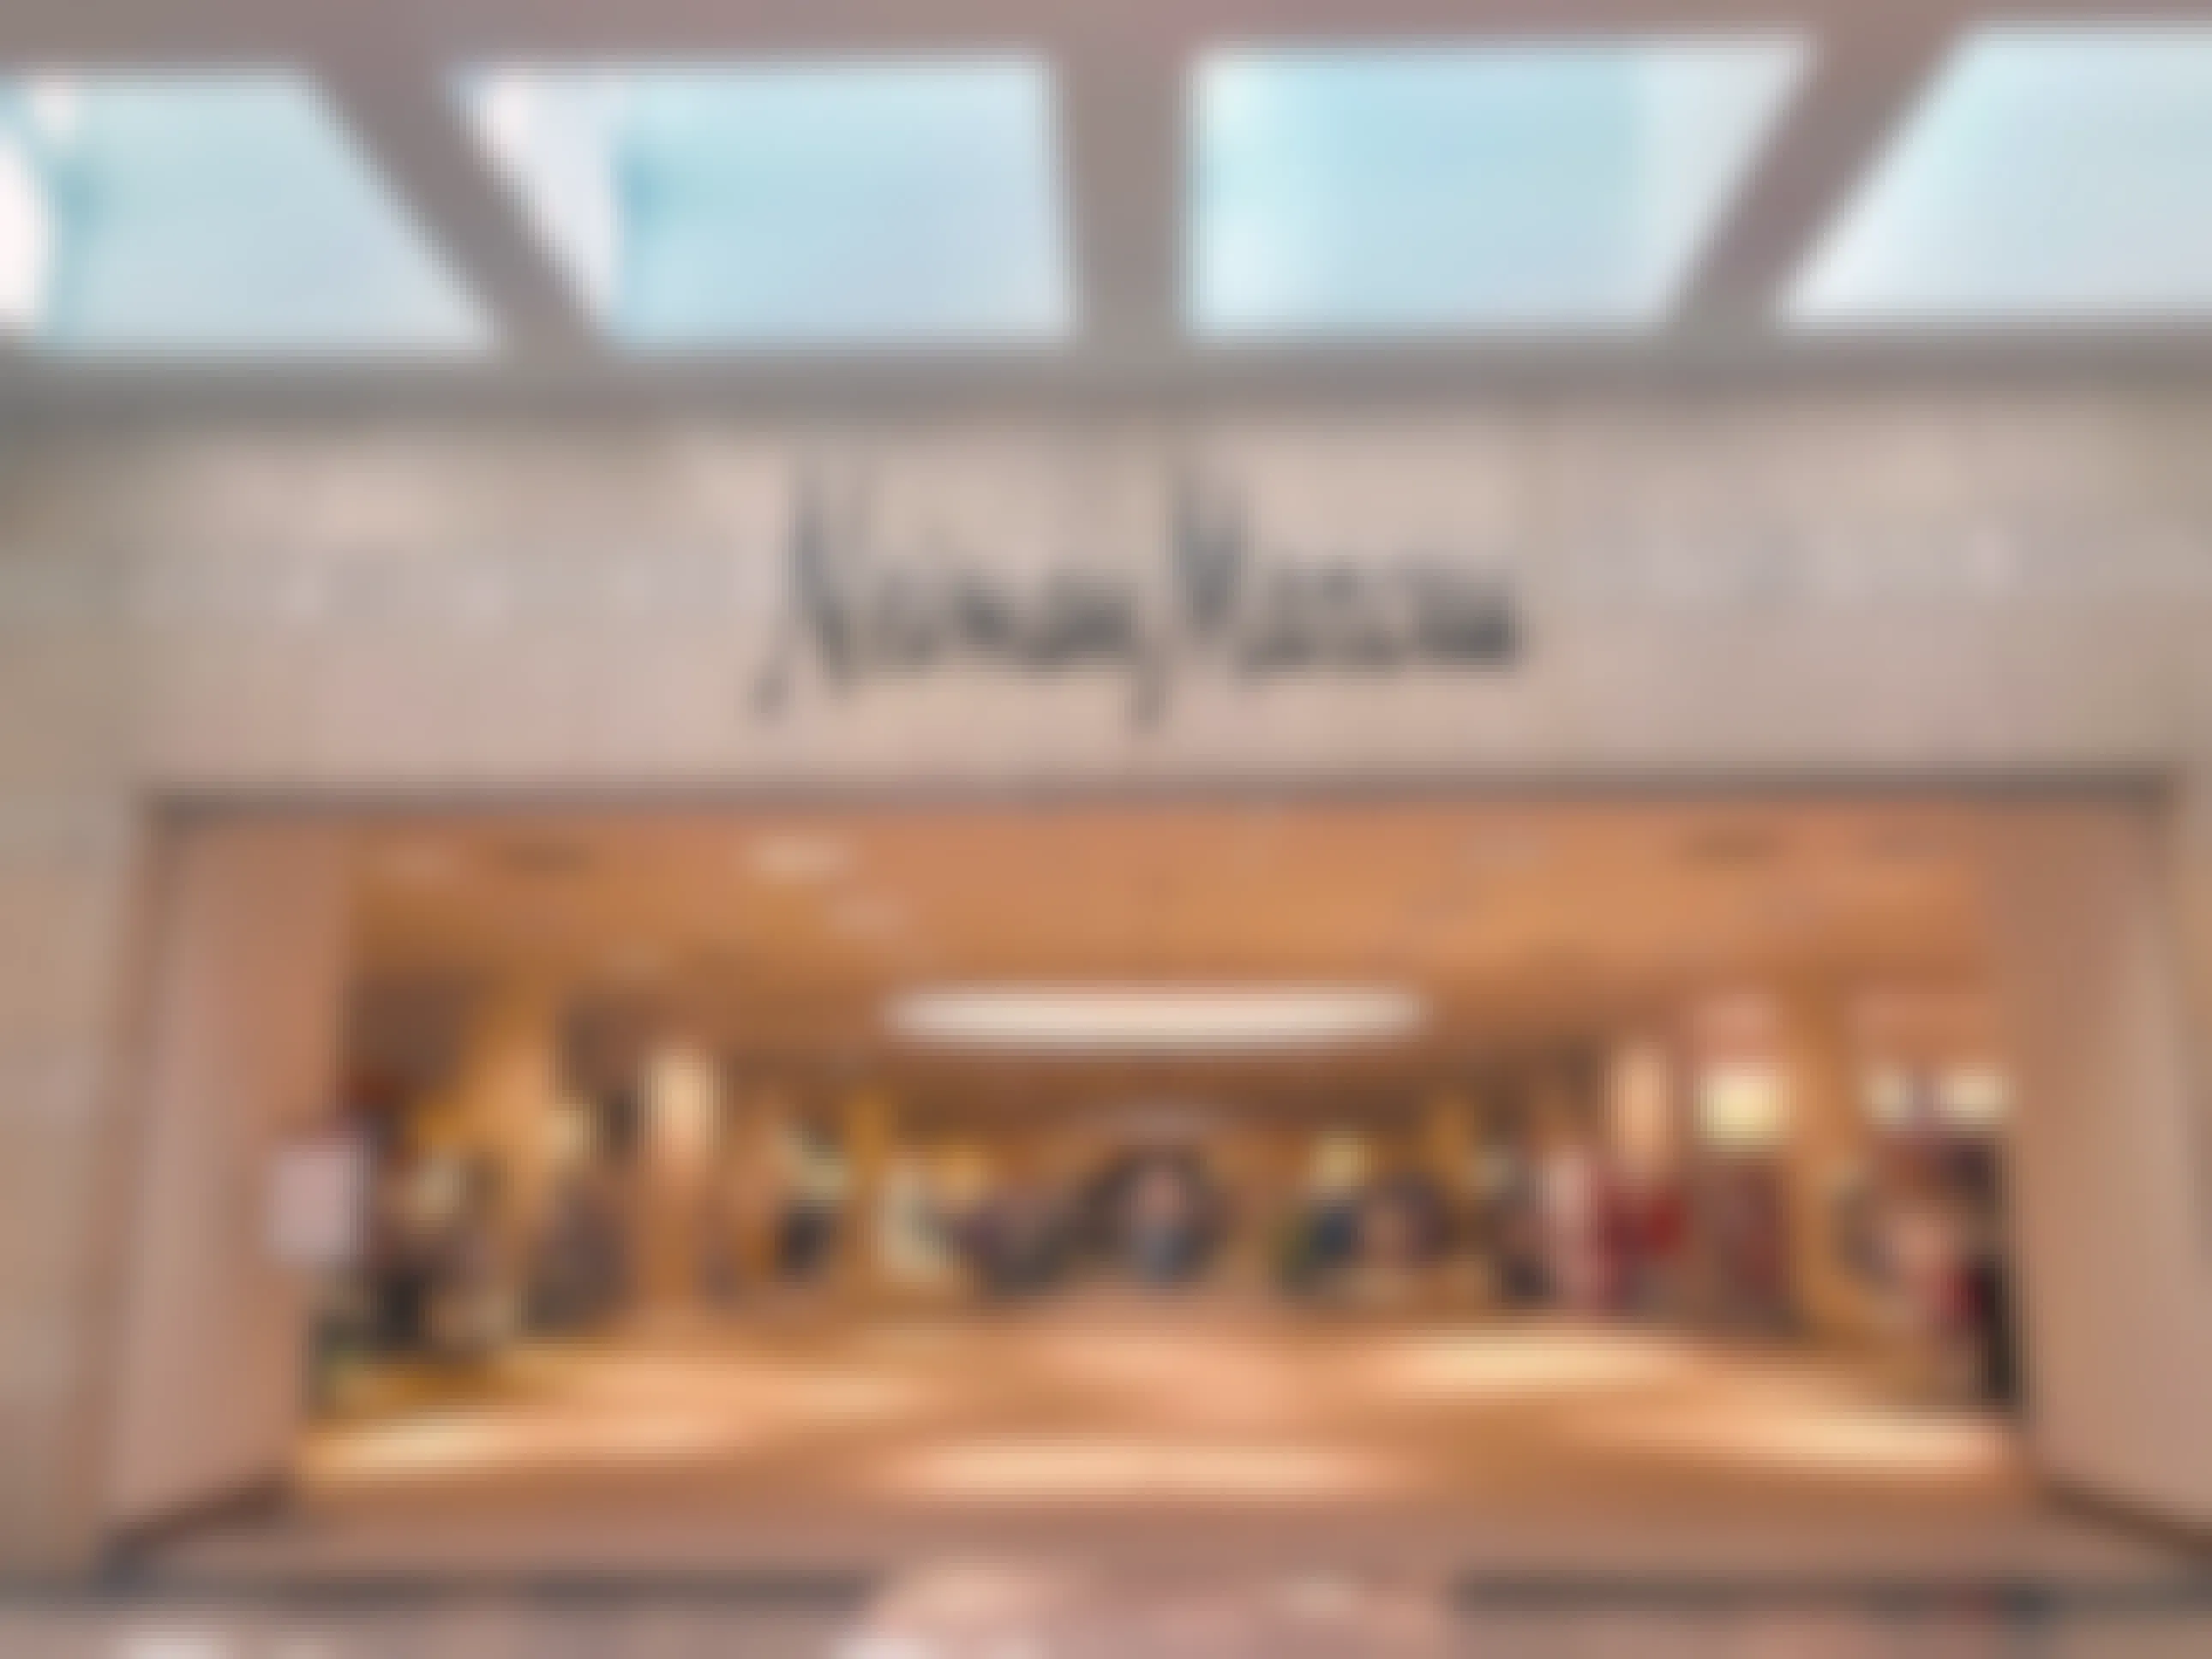 the front of a Neiman Marcus department store from inside the mall